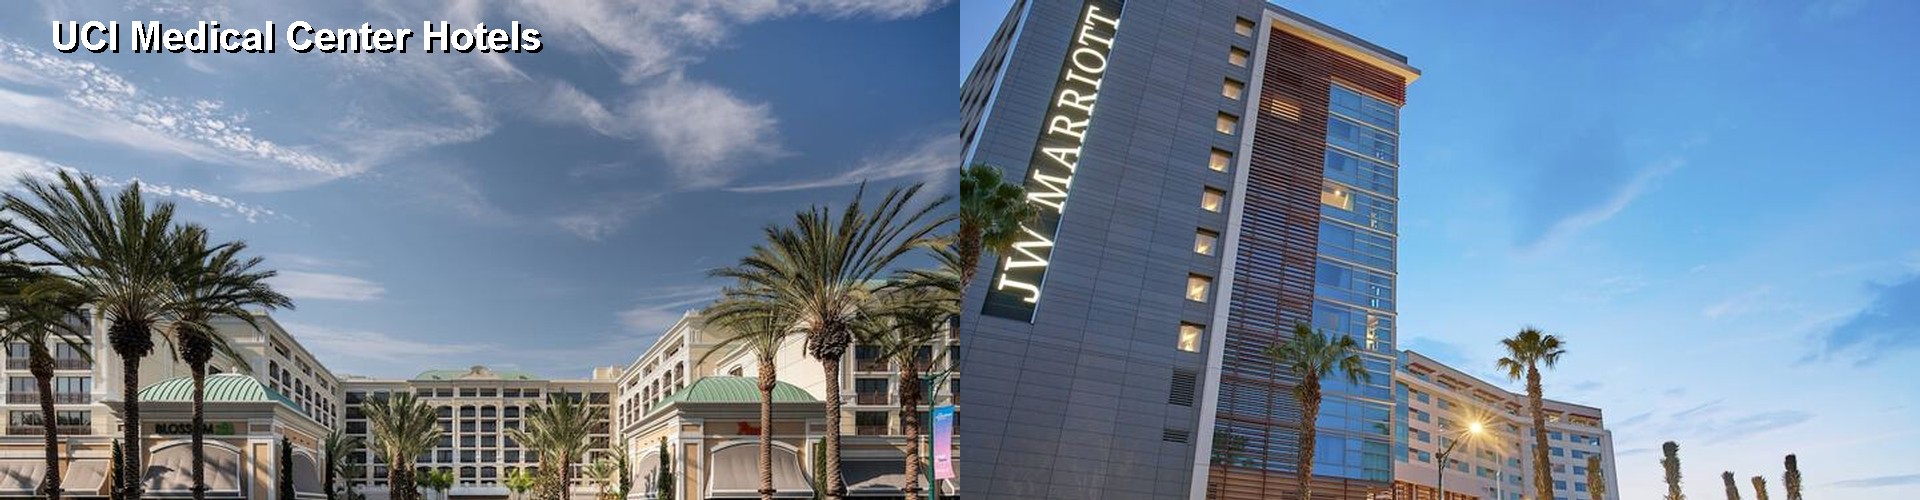 5 Best Hotels near UCI Medical Center